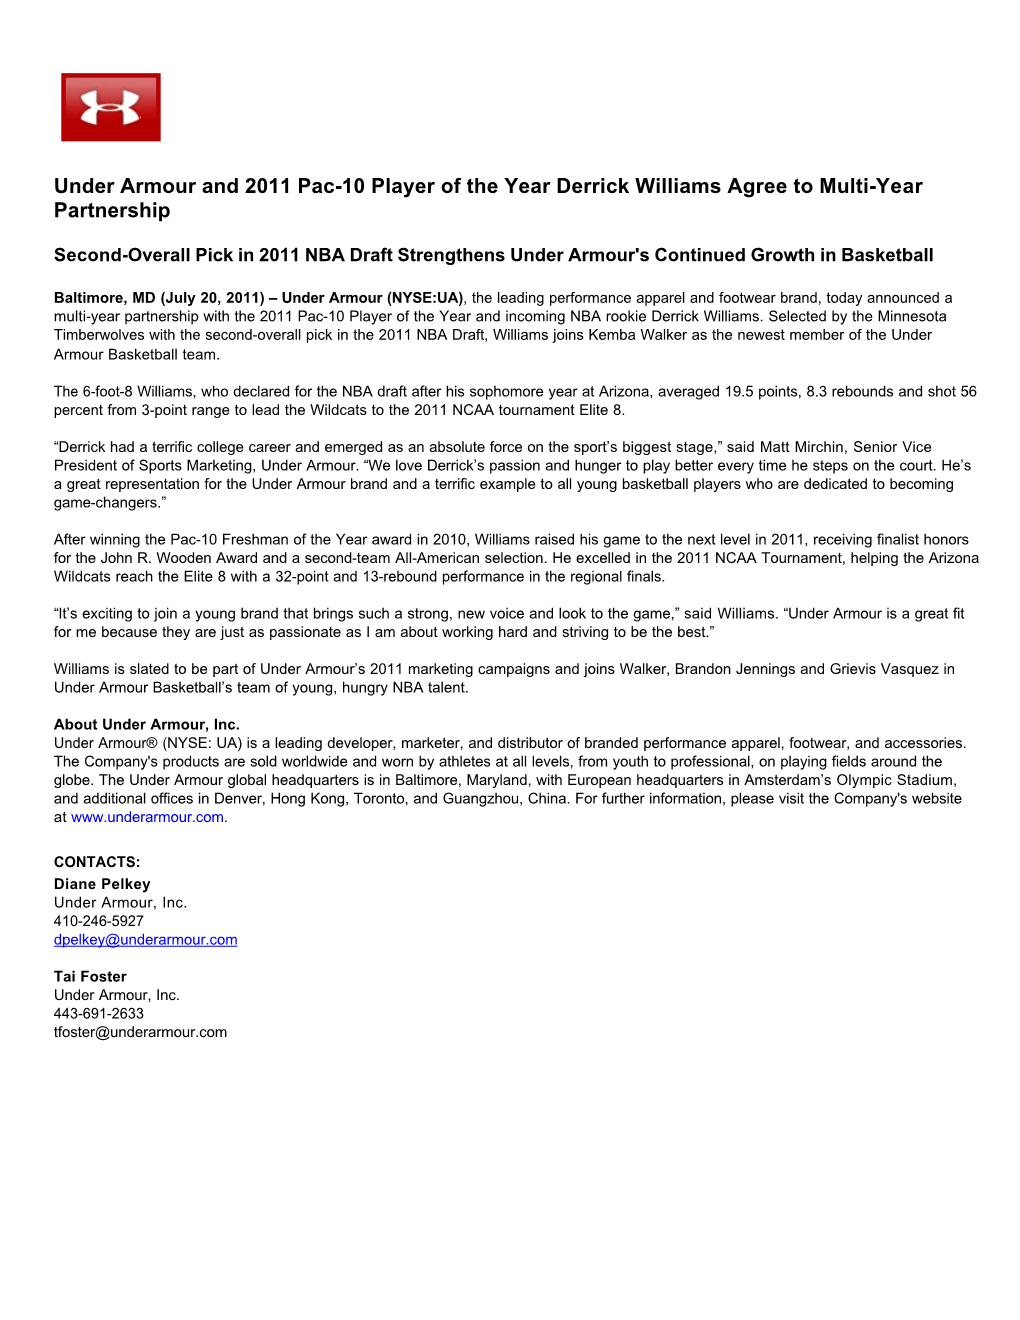 Under Armour and 2011 Pac-10 Player of the Year Derrick Williams Agree to Multi-Year Partnership